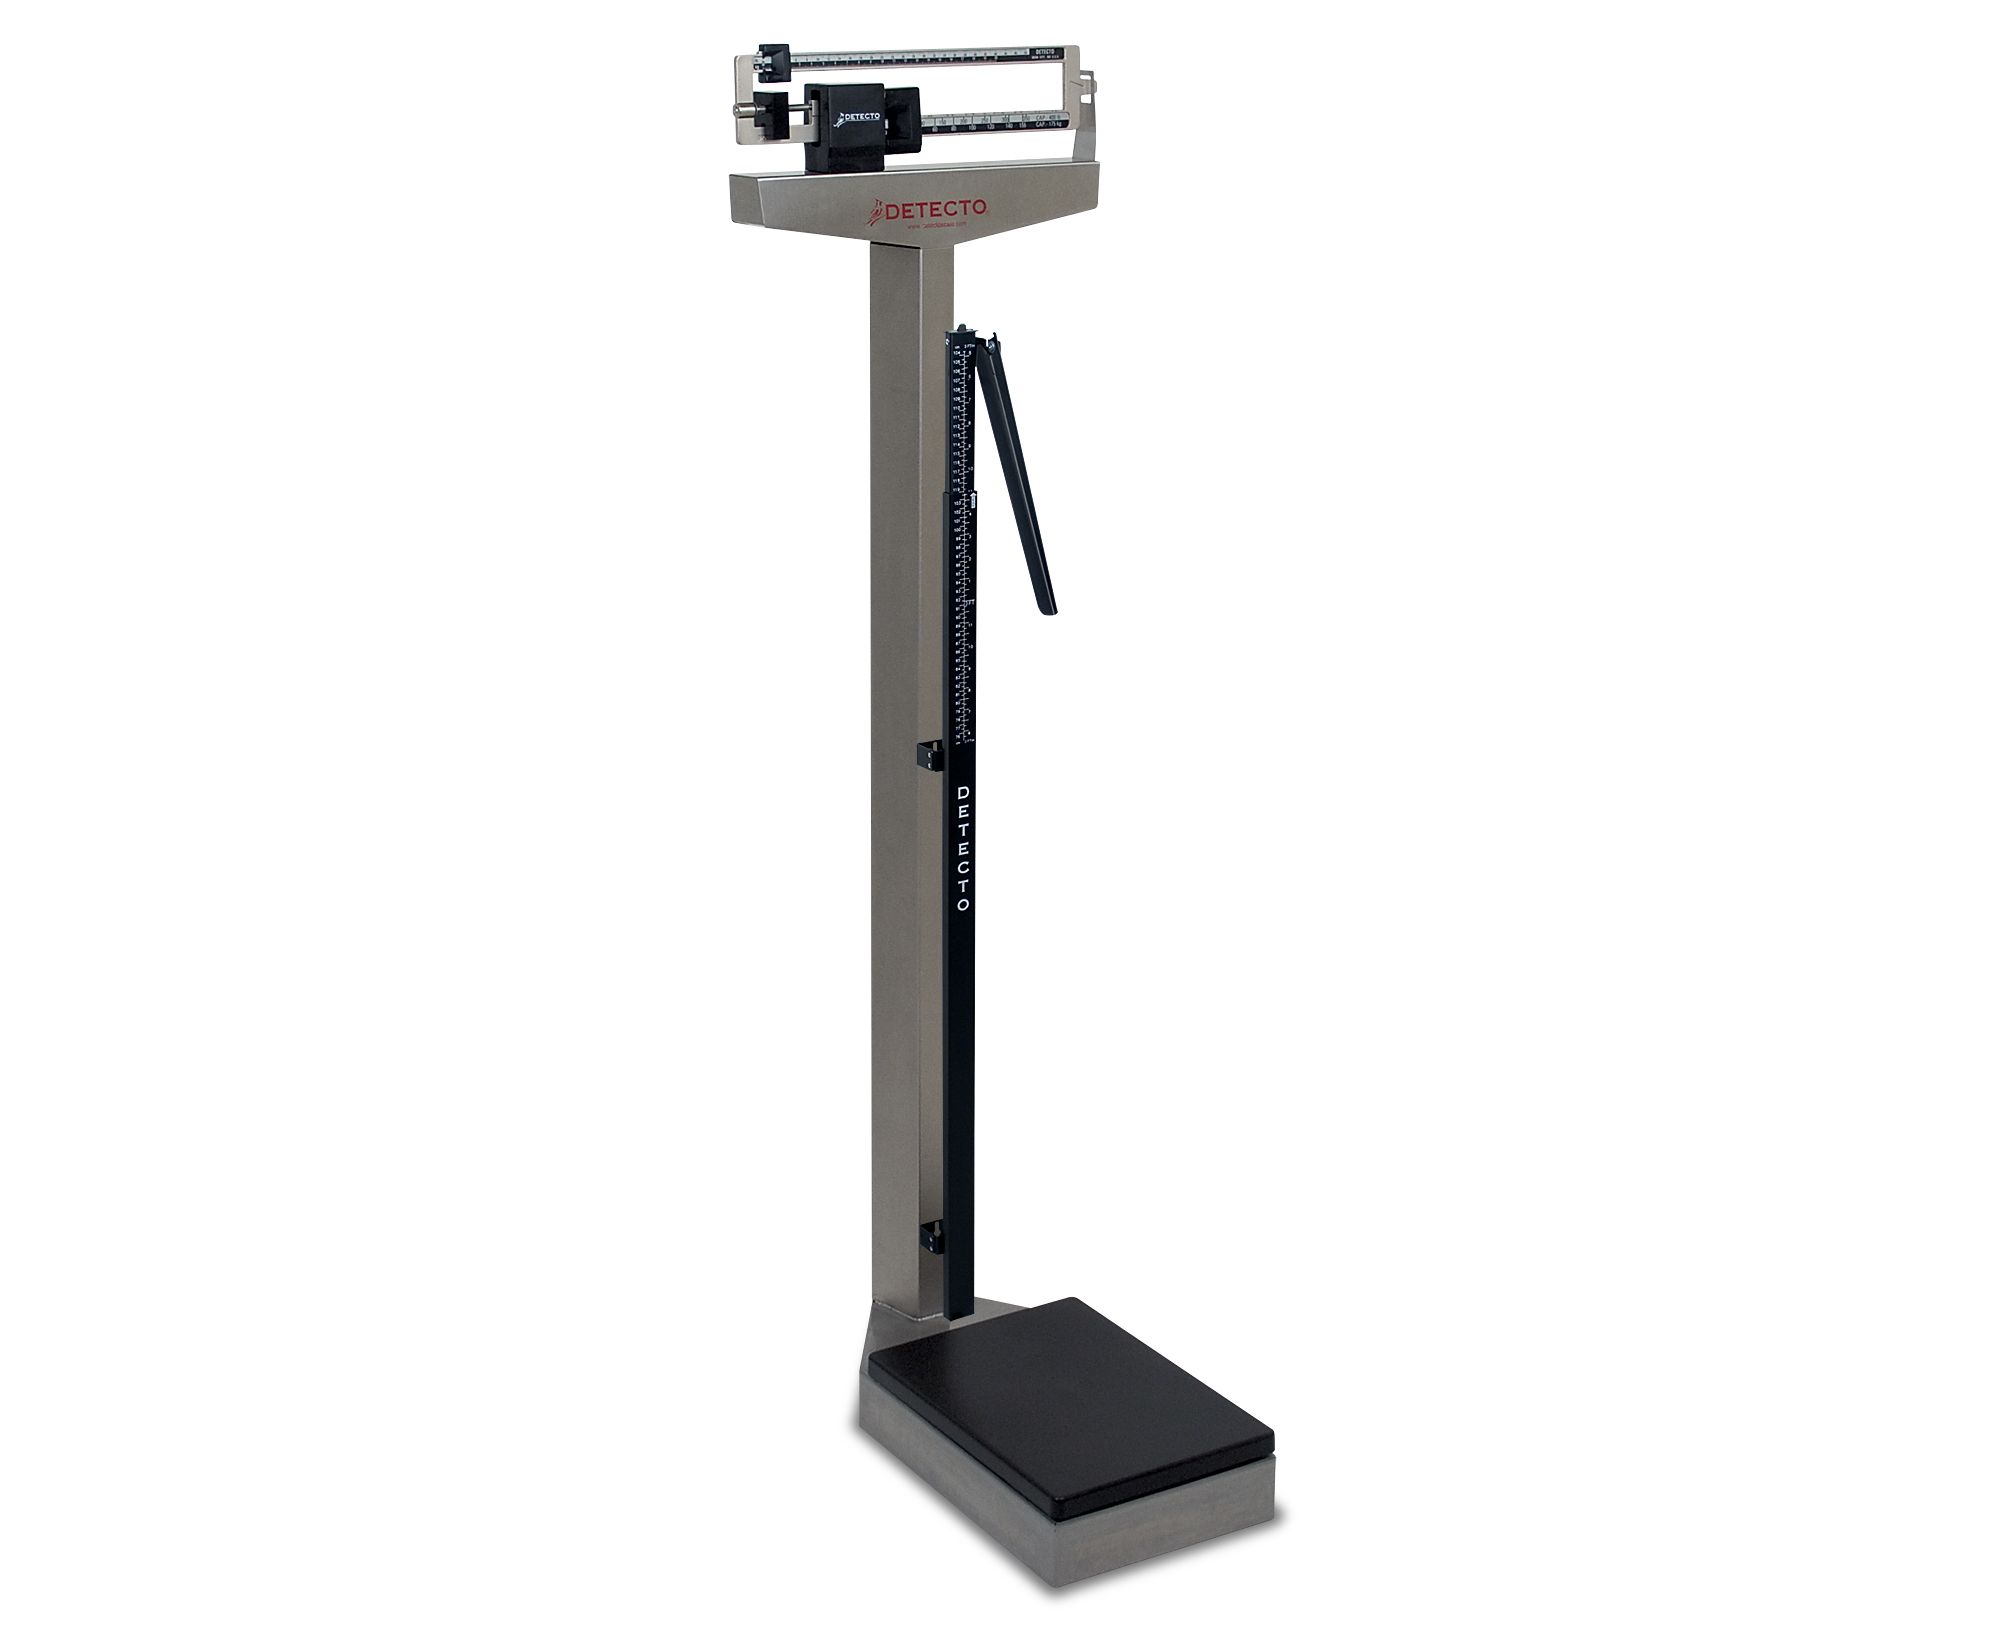 Detecto Eye Level Physician Scale 437